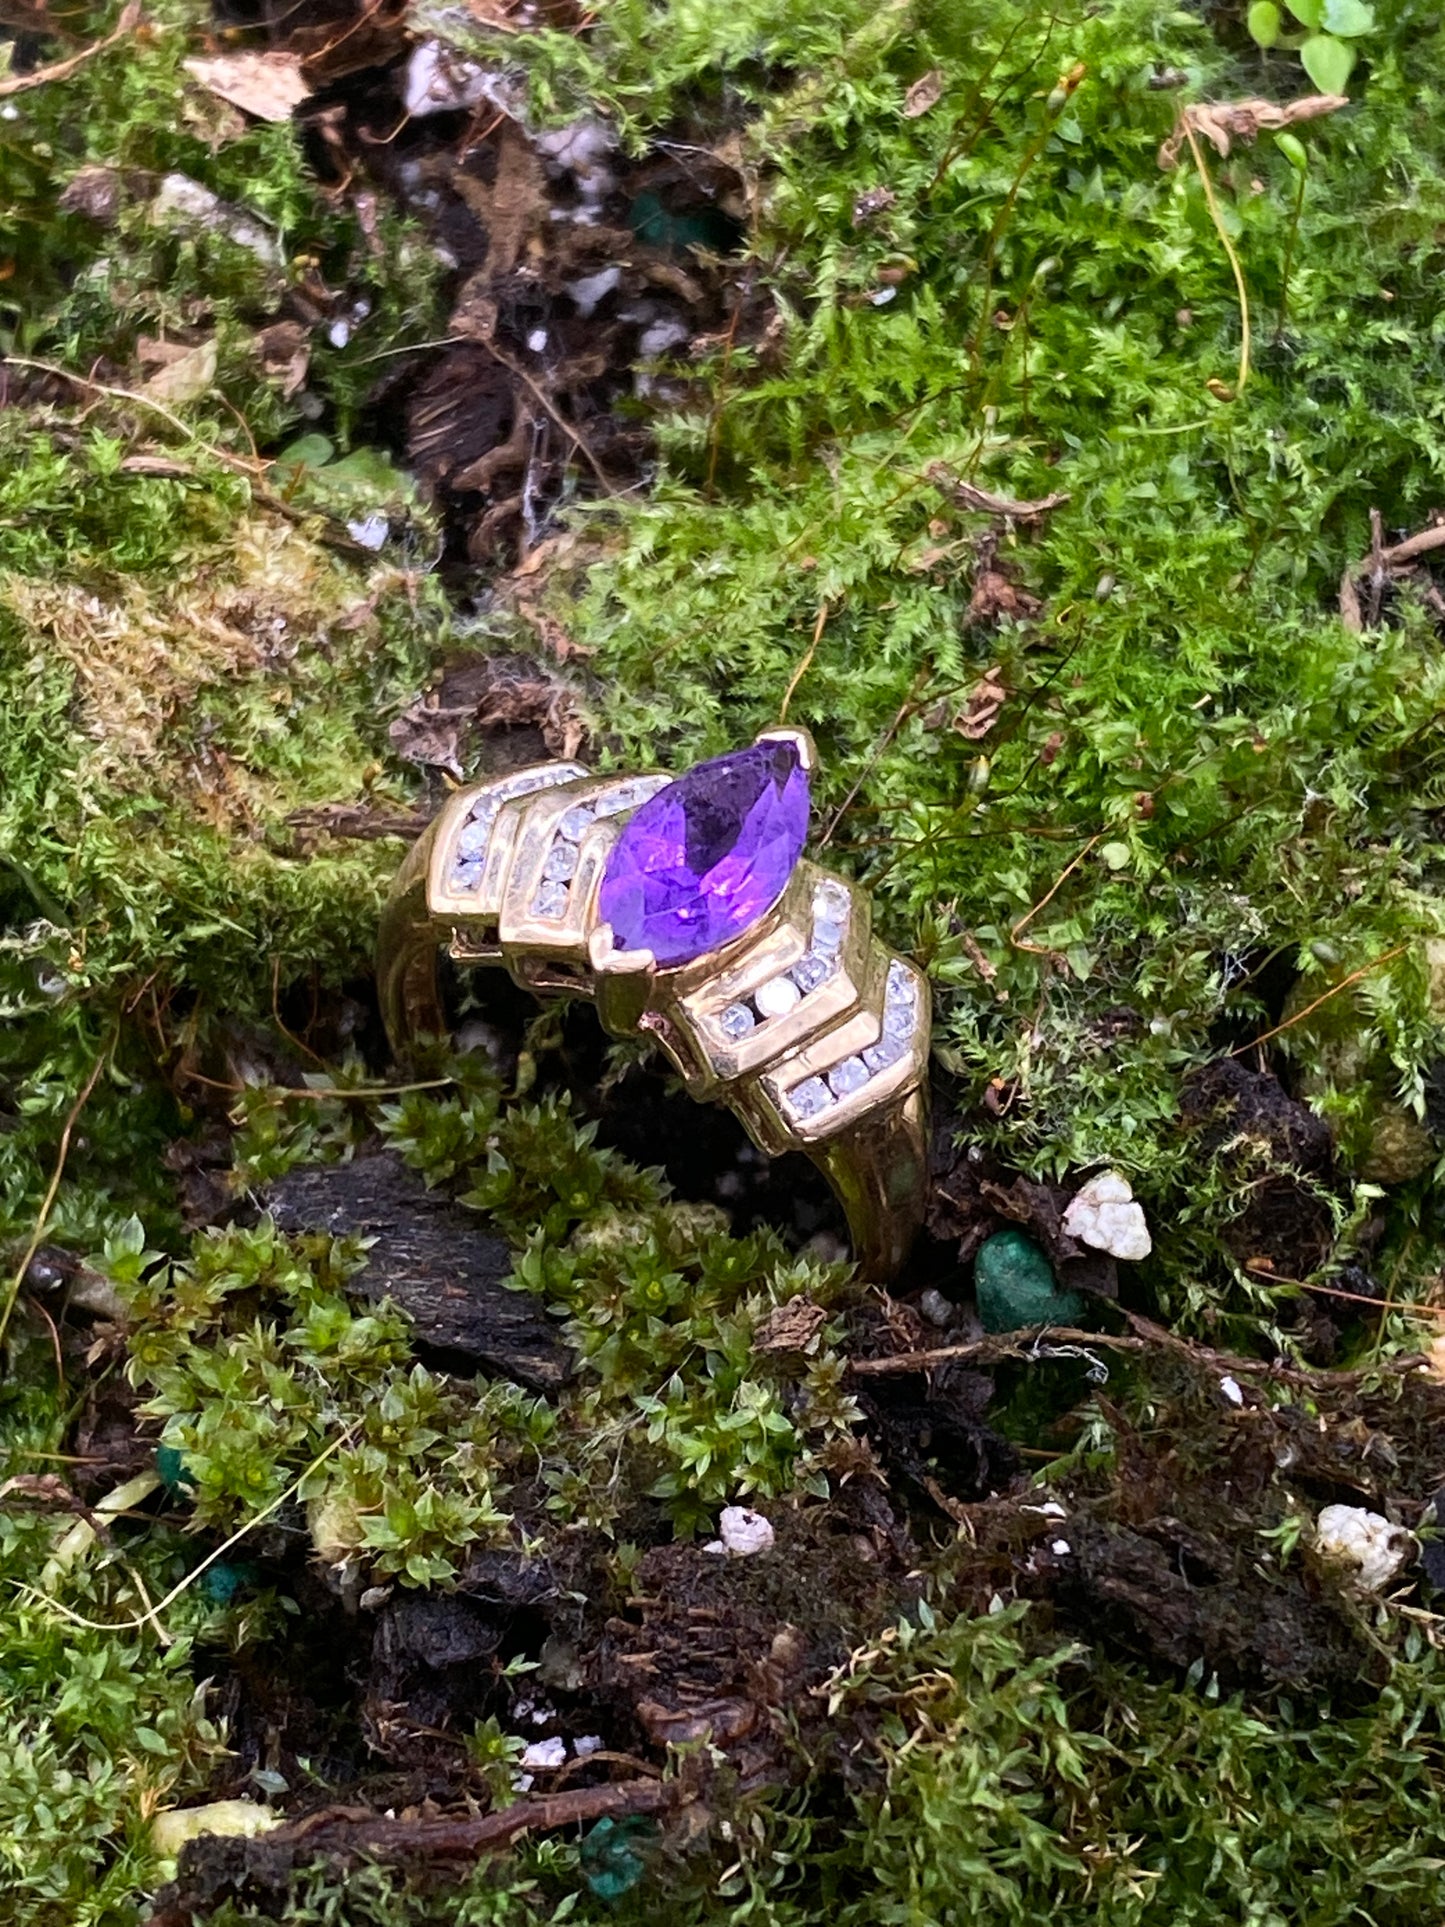 10K Gold Amethyst Ring with 18CT Diamonds